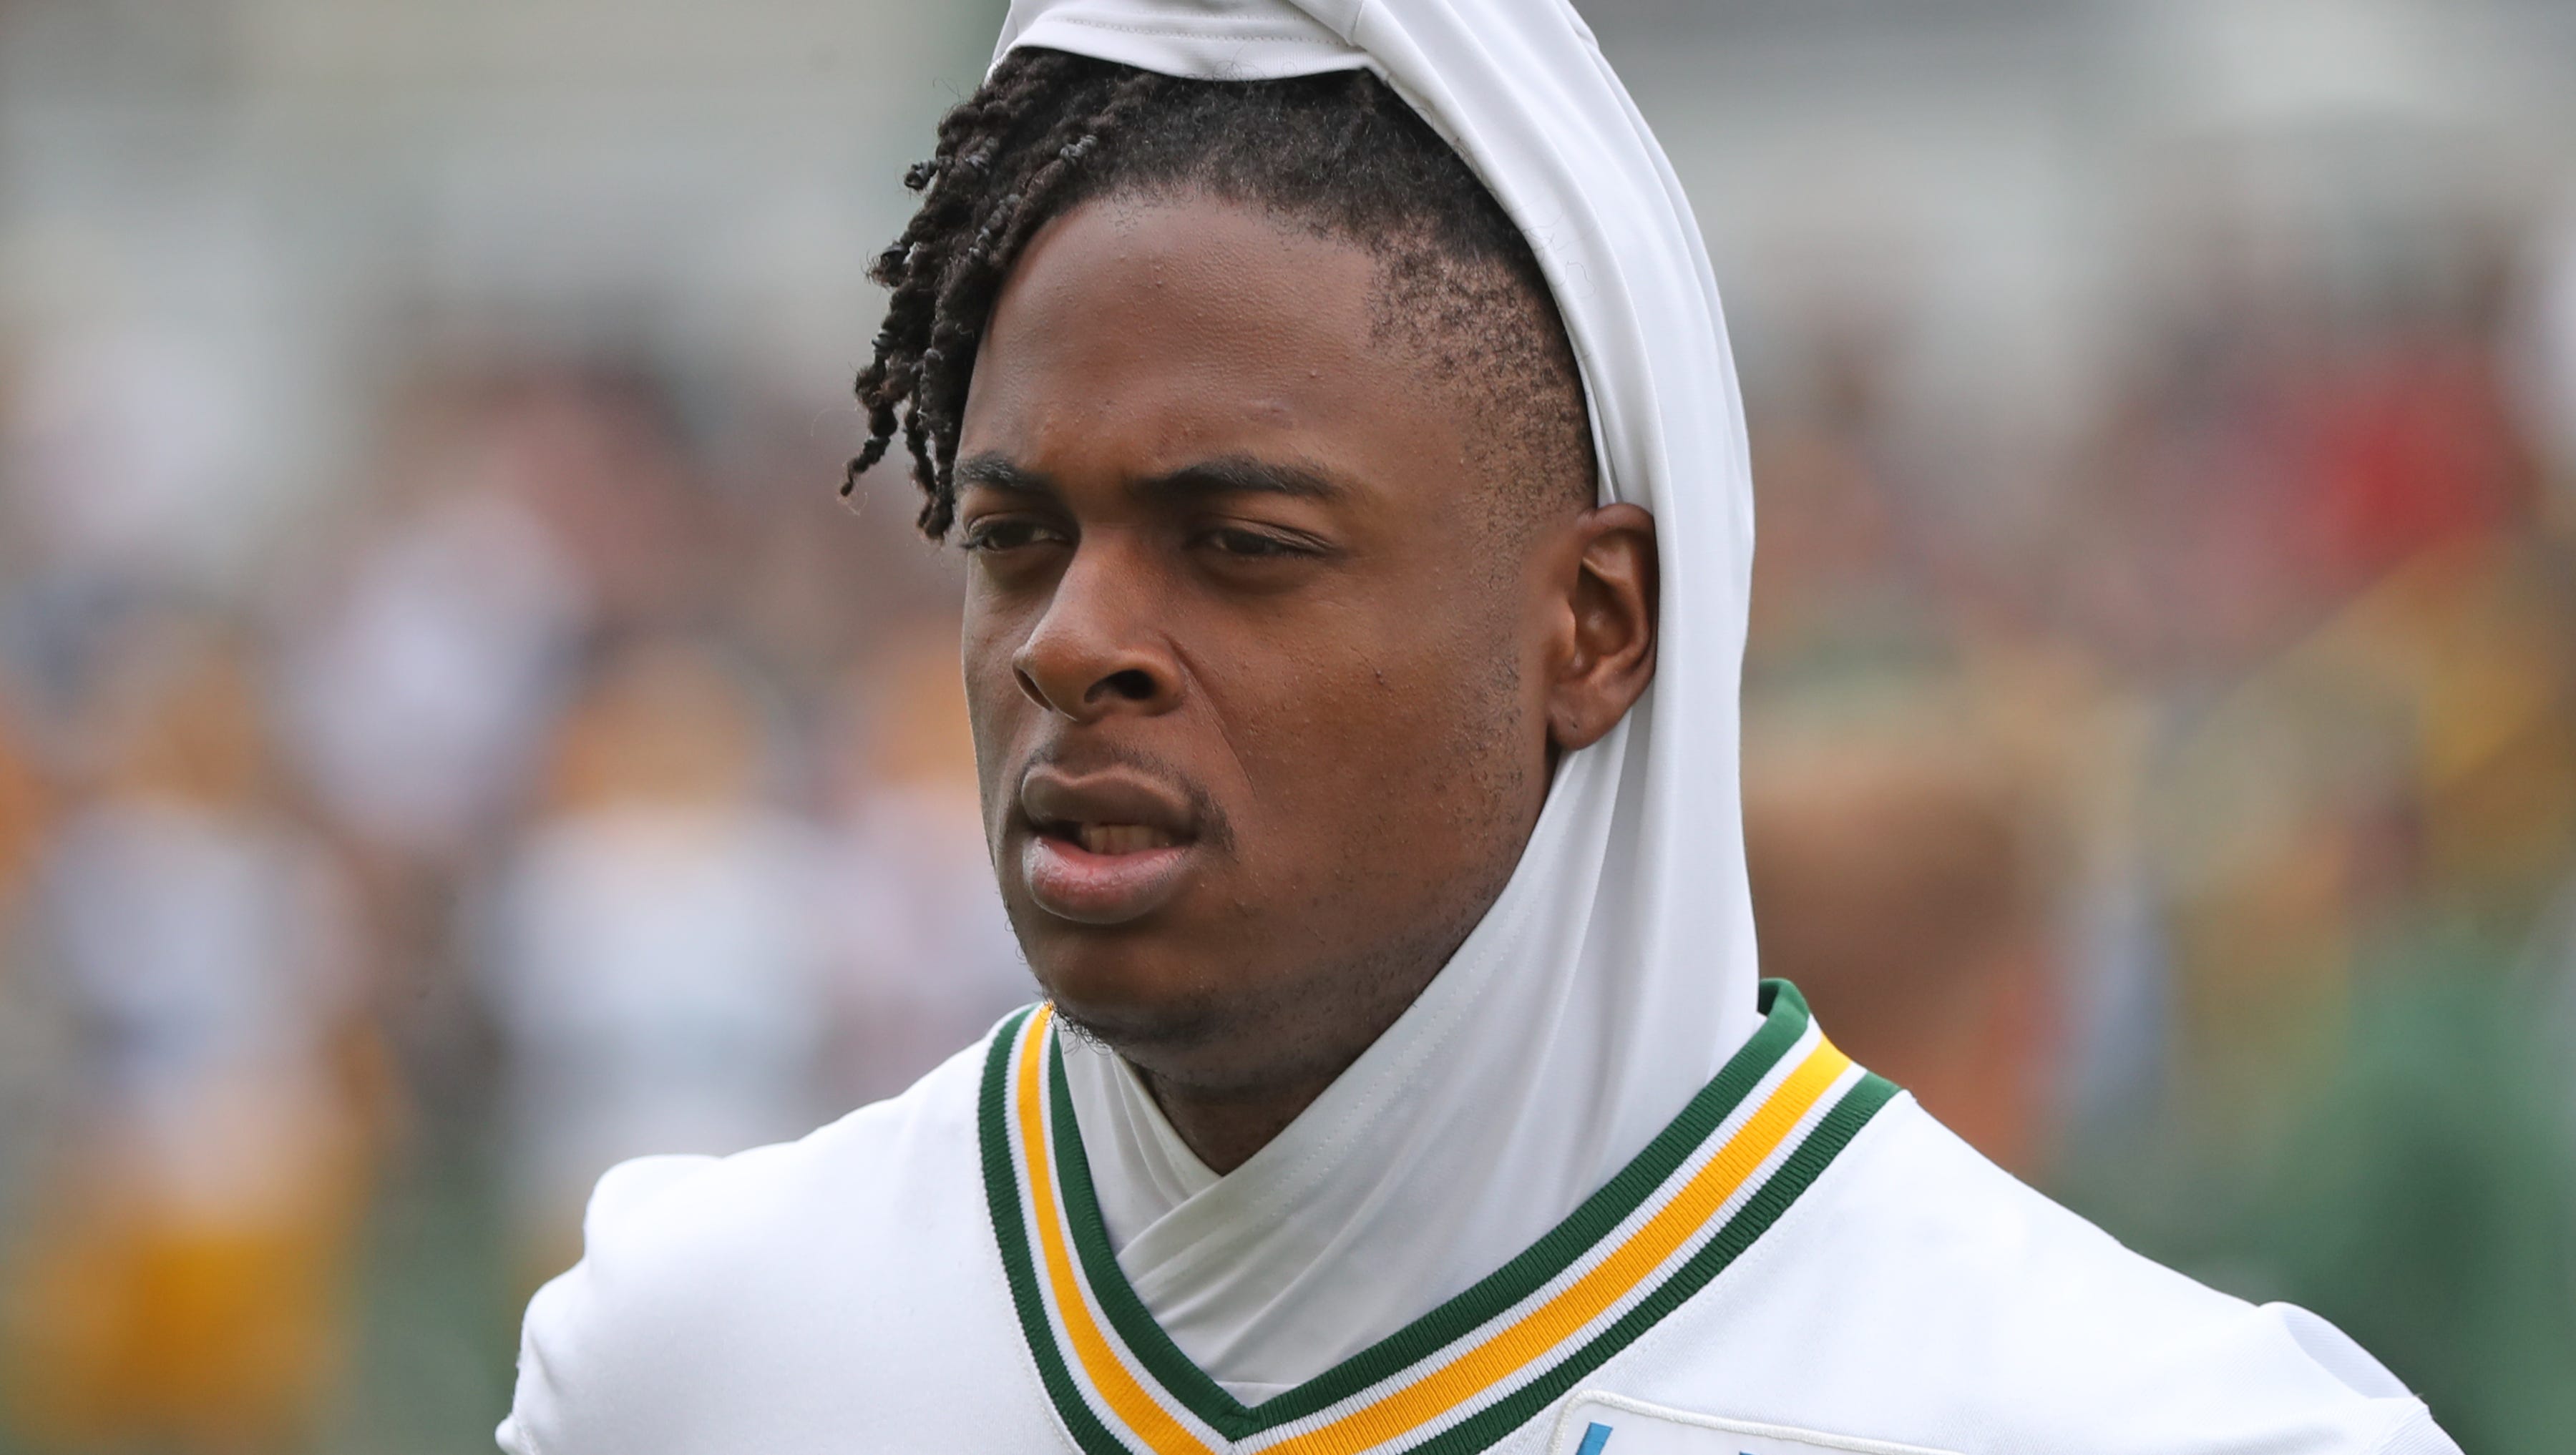 Green Bay Packers wide receiver Davante Adams (17) trots off the field during Organized Team Activities at Ray Nitschke Field Thursday, May 31, 2018 in Ashwaubenon, Wis.